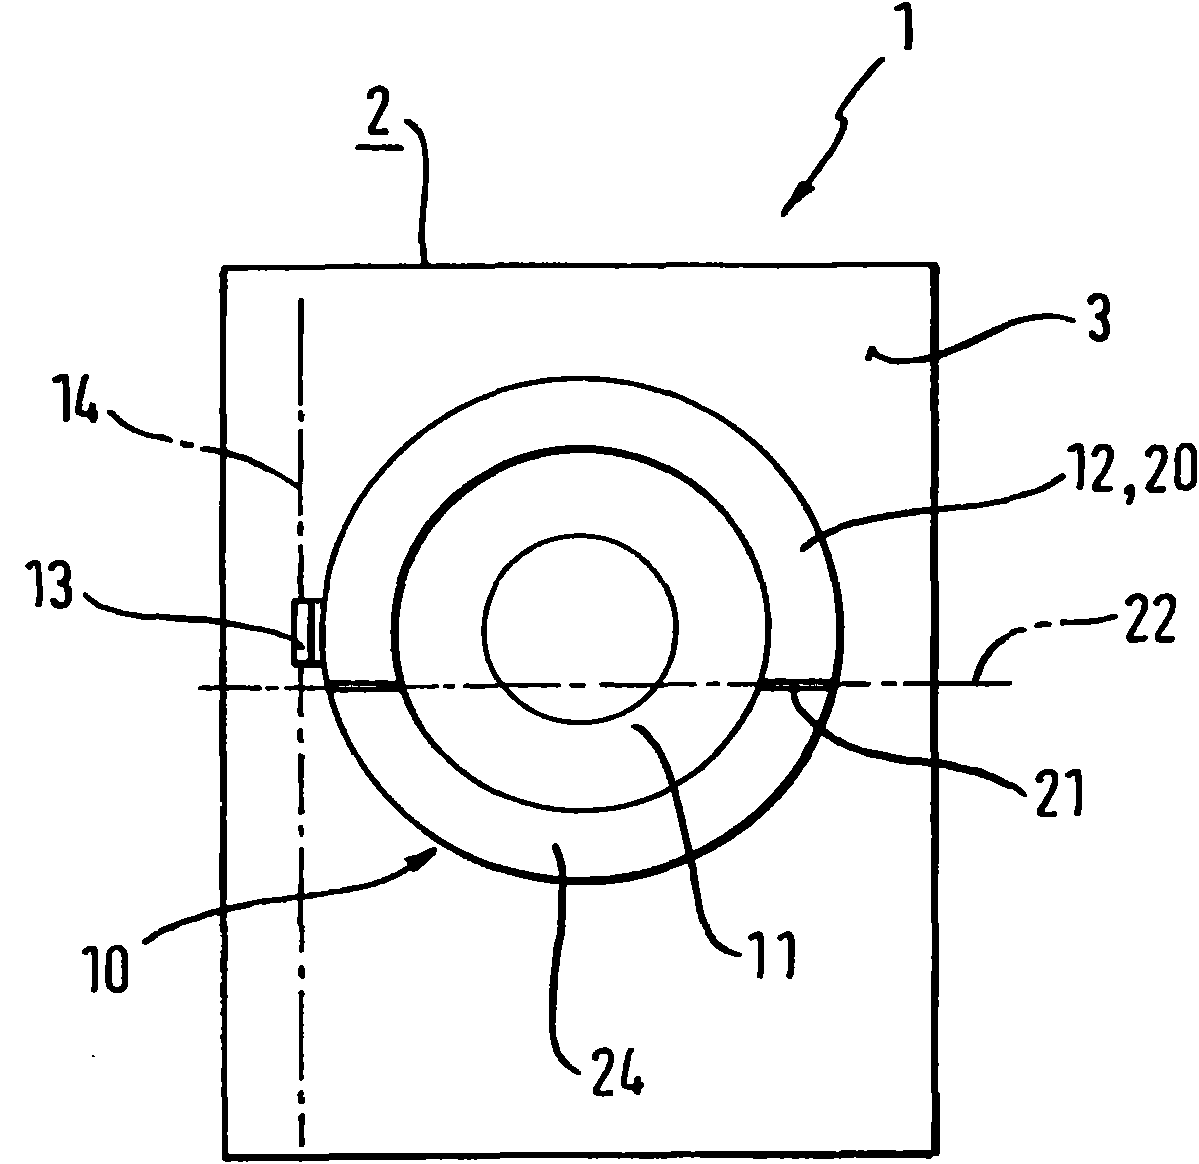 Laundry care device with a horizontally pivoting grip element